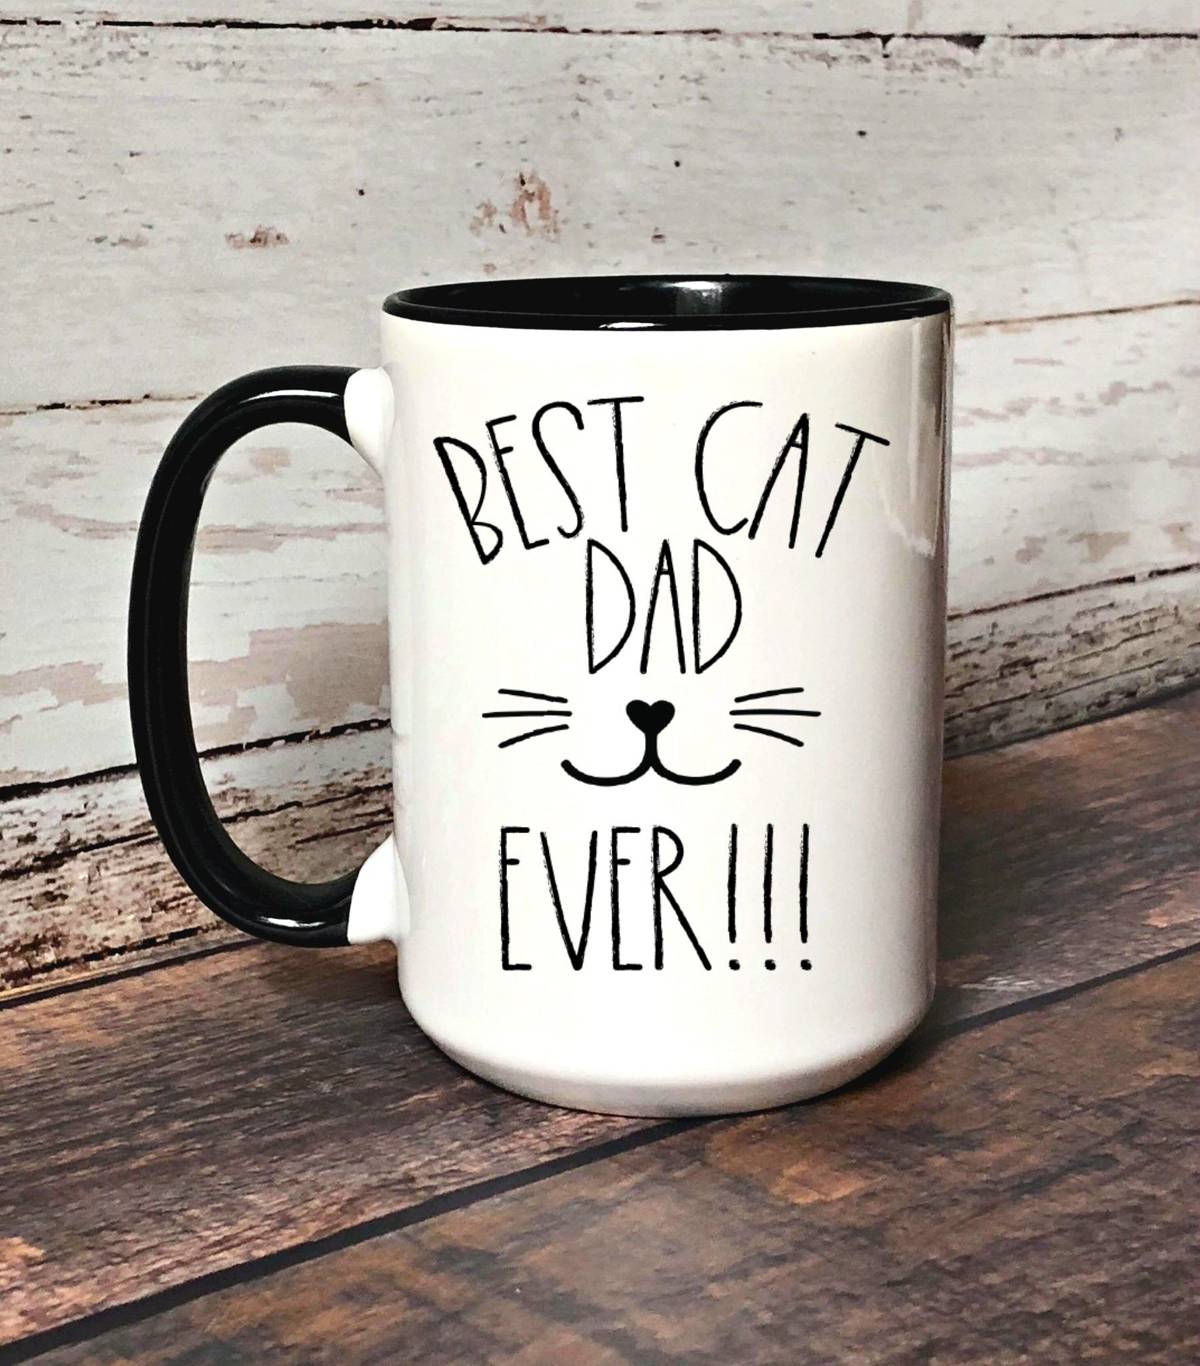 Best Cat Dad Ever For Cat Dad Funny Fathers Day T For Cat Dad 3341